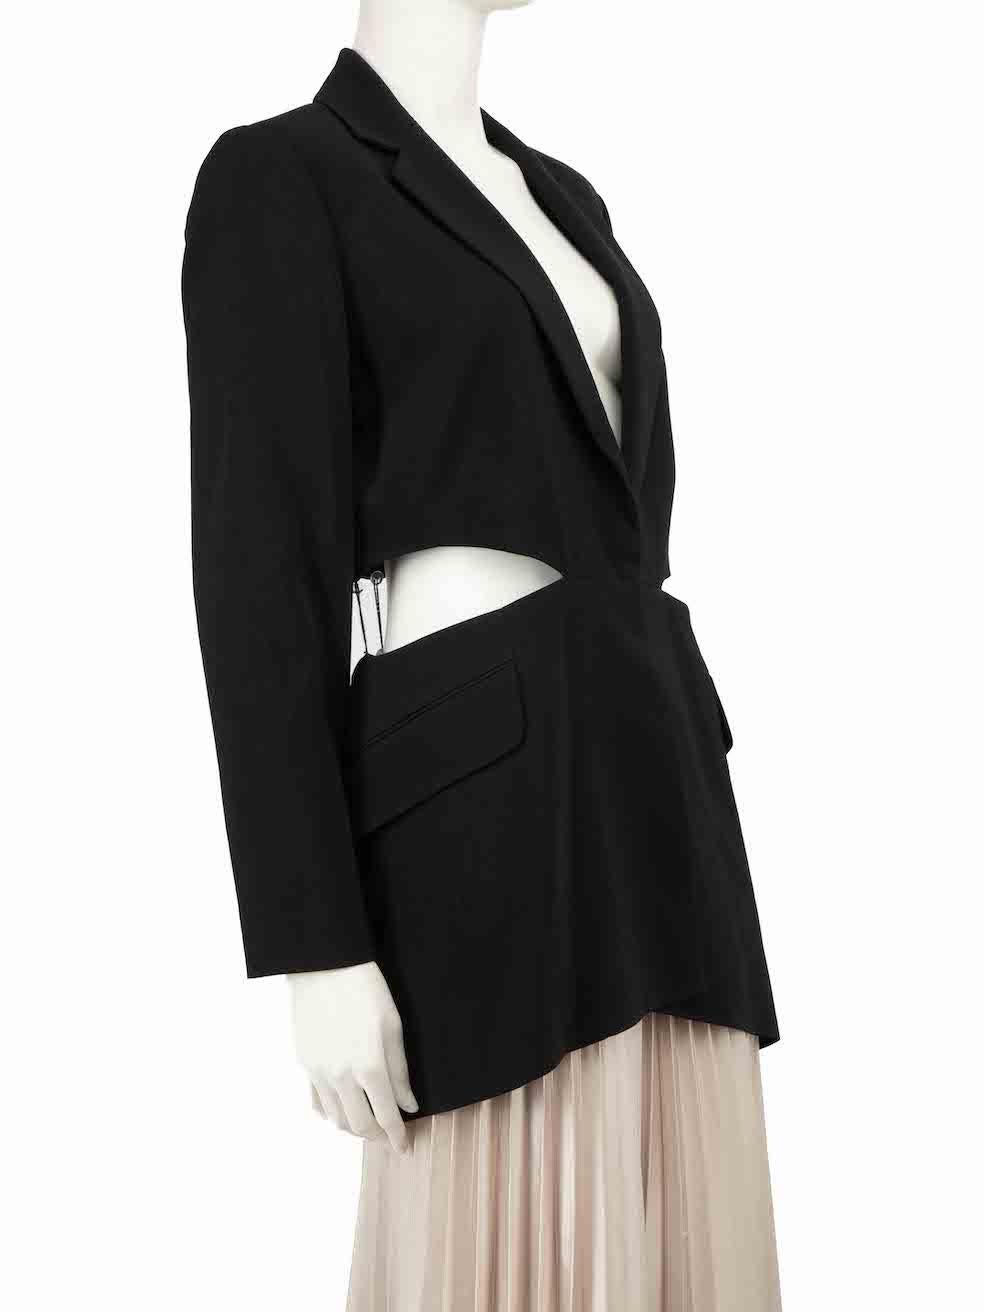 CONDITION is Very good. Minimal wear to blazer is evident. Minimal wear to external and internal waist with small plucks to the weave on this used Carolina Herrera designer resale item.
 
 
 
 Details
 
 
 Black
 
 Viscose
 
 Mid length blazer
 
